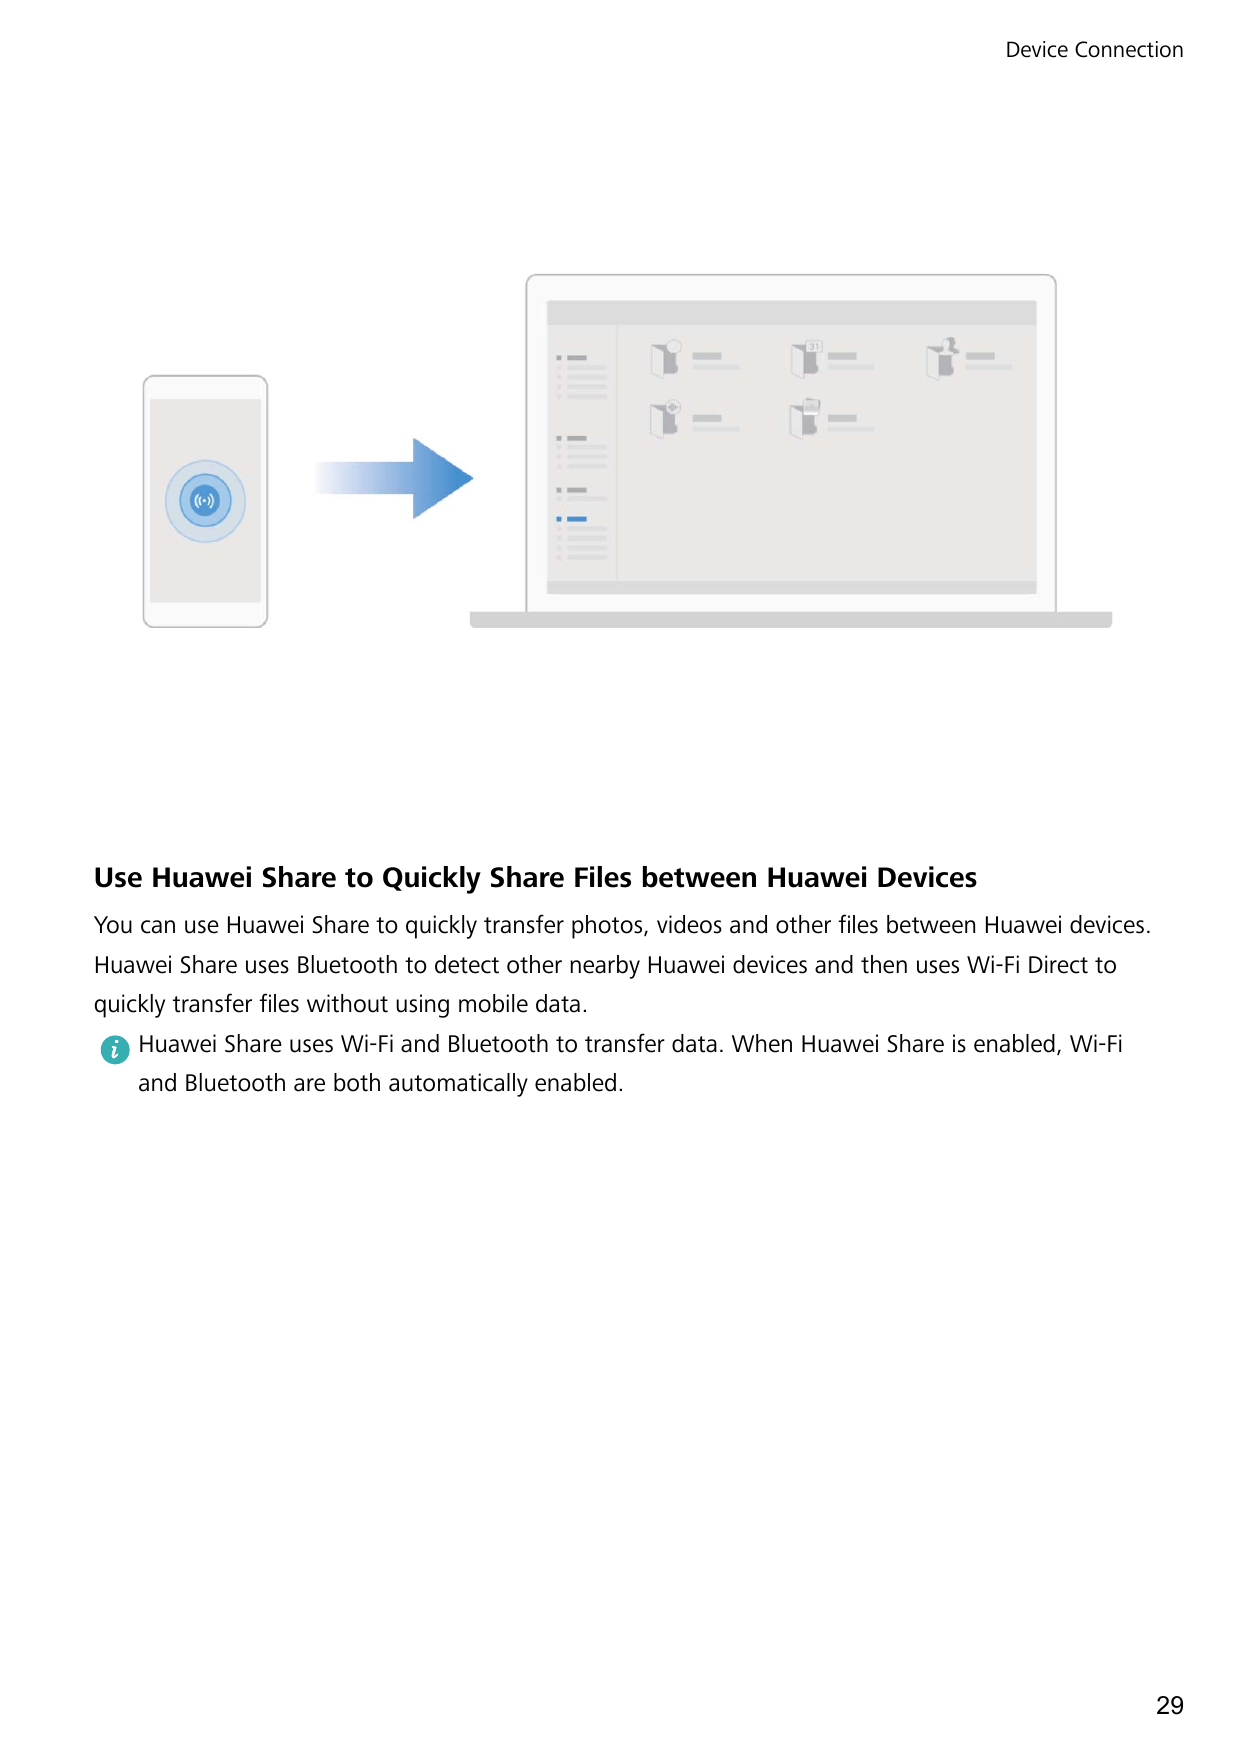 Device ConnectionUse Huawei Share to Quickly Share Files between Huawei DevicesYou can use Huawei Share to quickly transfer phot